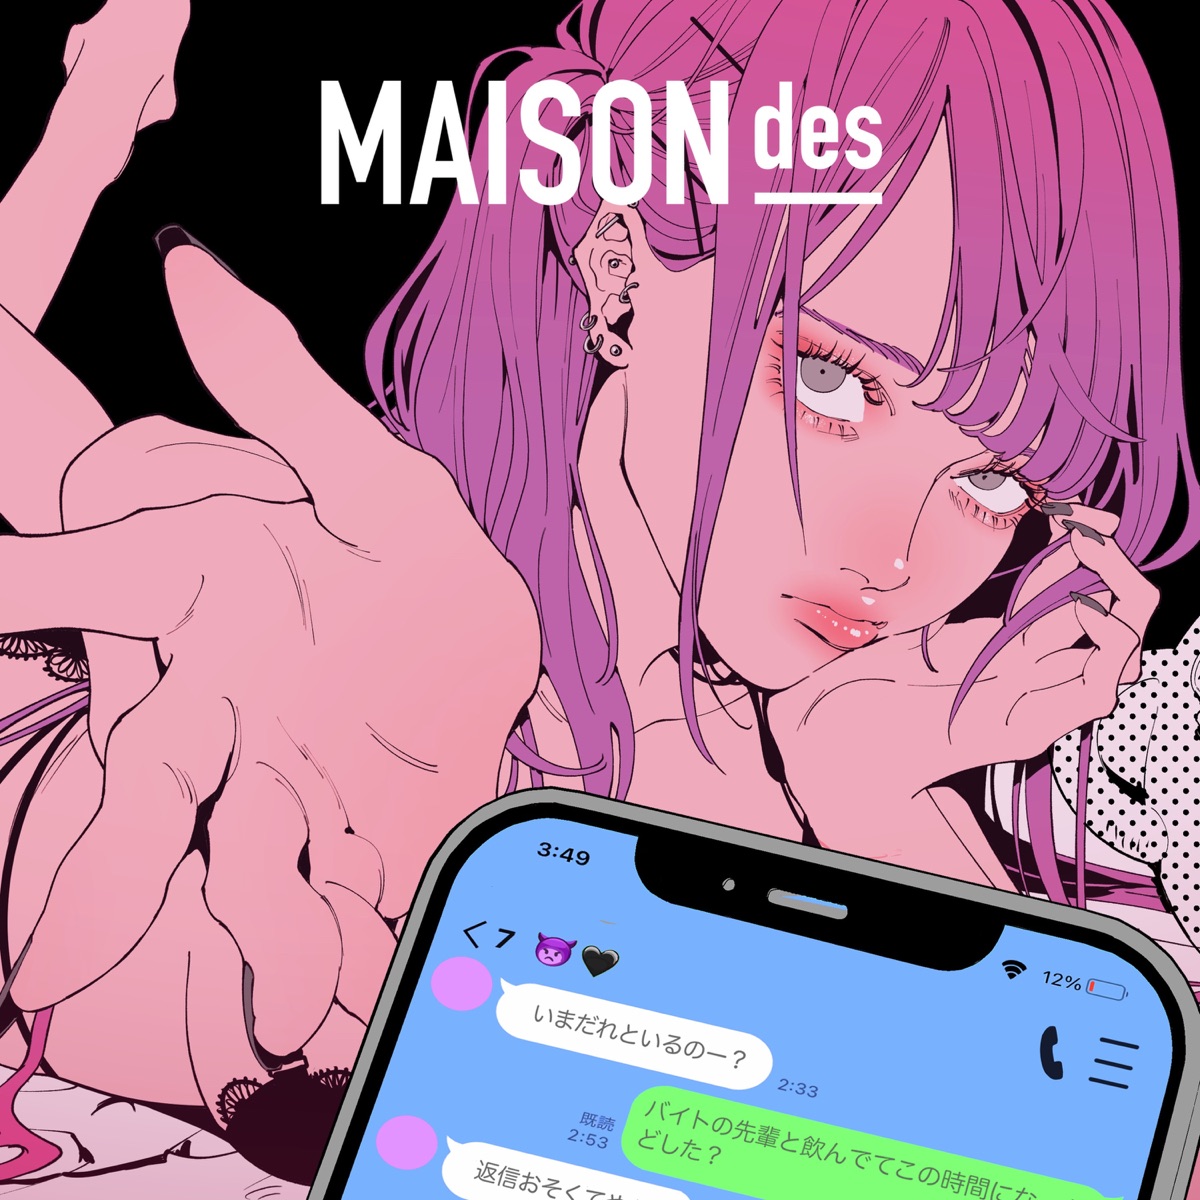 Cover art for『MAISONdes - Show Me Your Phone (feat. Hashimero & maeshima soshi)』from the release『Show Me Your Phone (feat. Hashimero & maeshima soshi)』